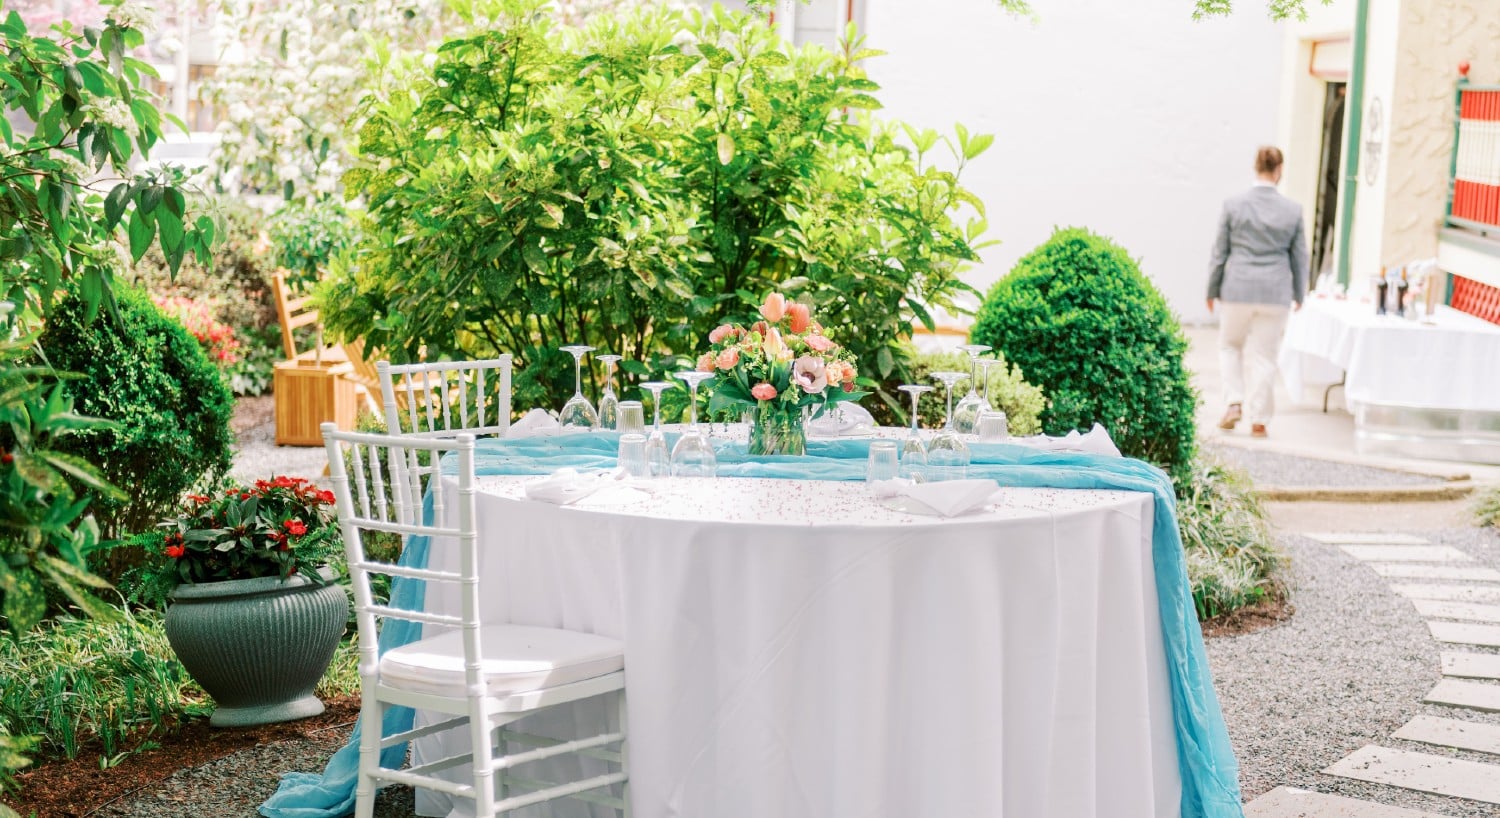 A round table with white linens, set for a wedding reception on an outdoor patio surrounded by lush greenery